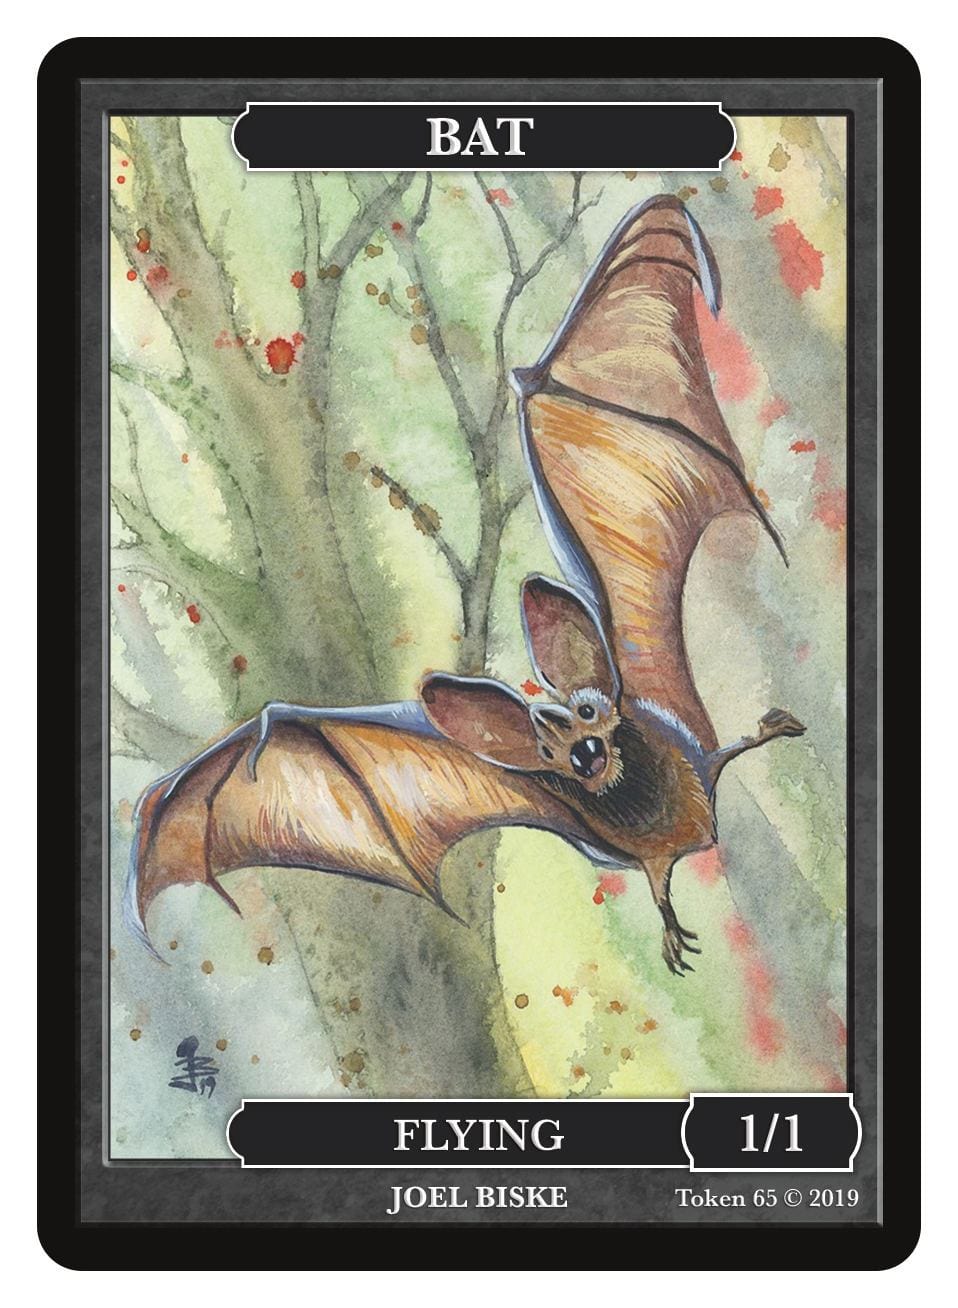 Bat Token (1/1 - Flying) by Joel Biske - Token - Original Magic Art - Accessories for Magic the Gathering and other card games